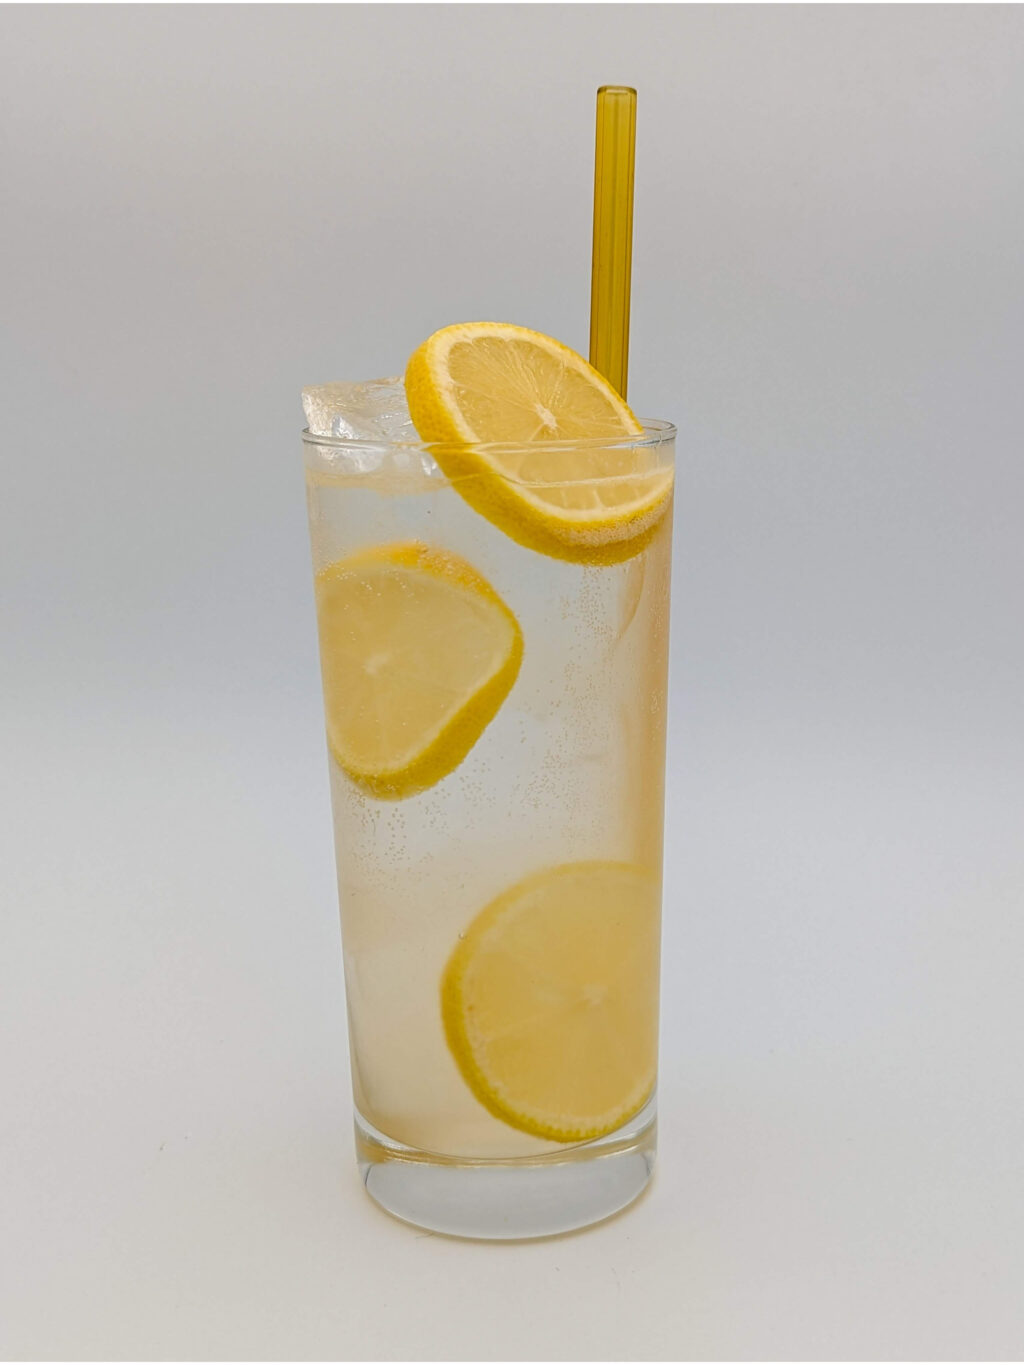 Light yellow liquid in a tall glass with large slices of lemon